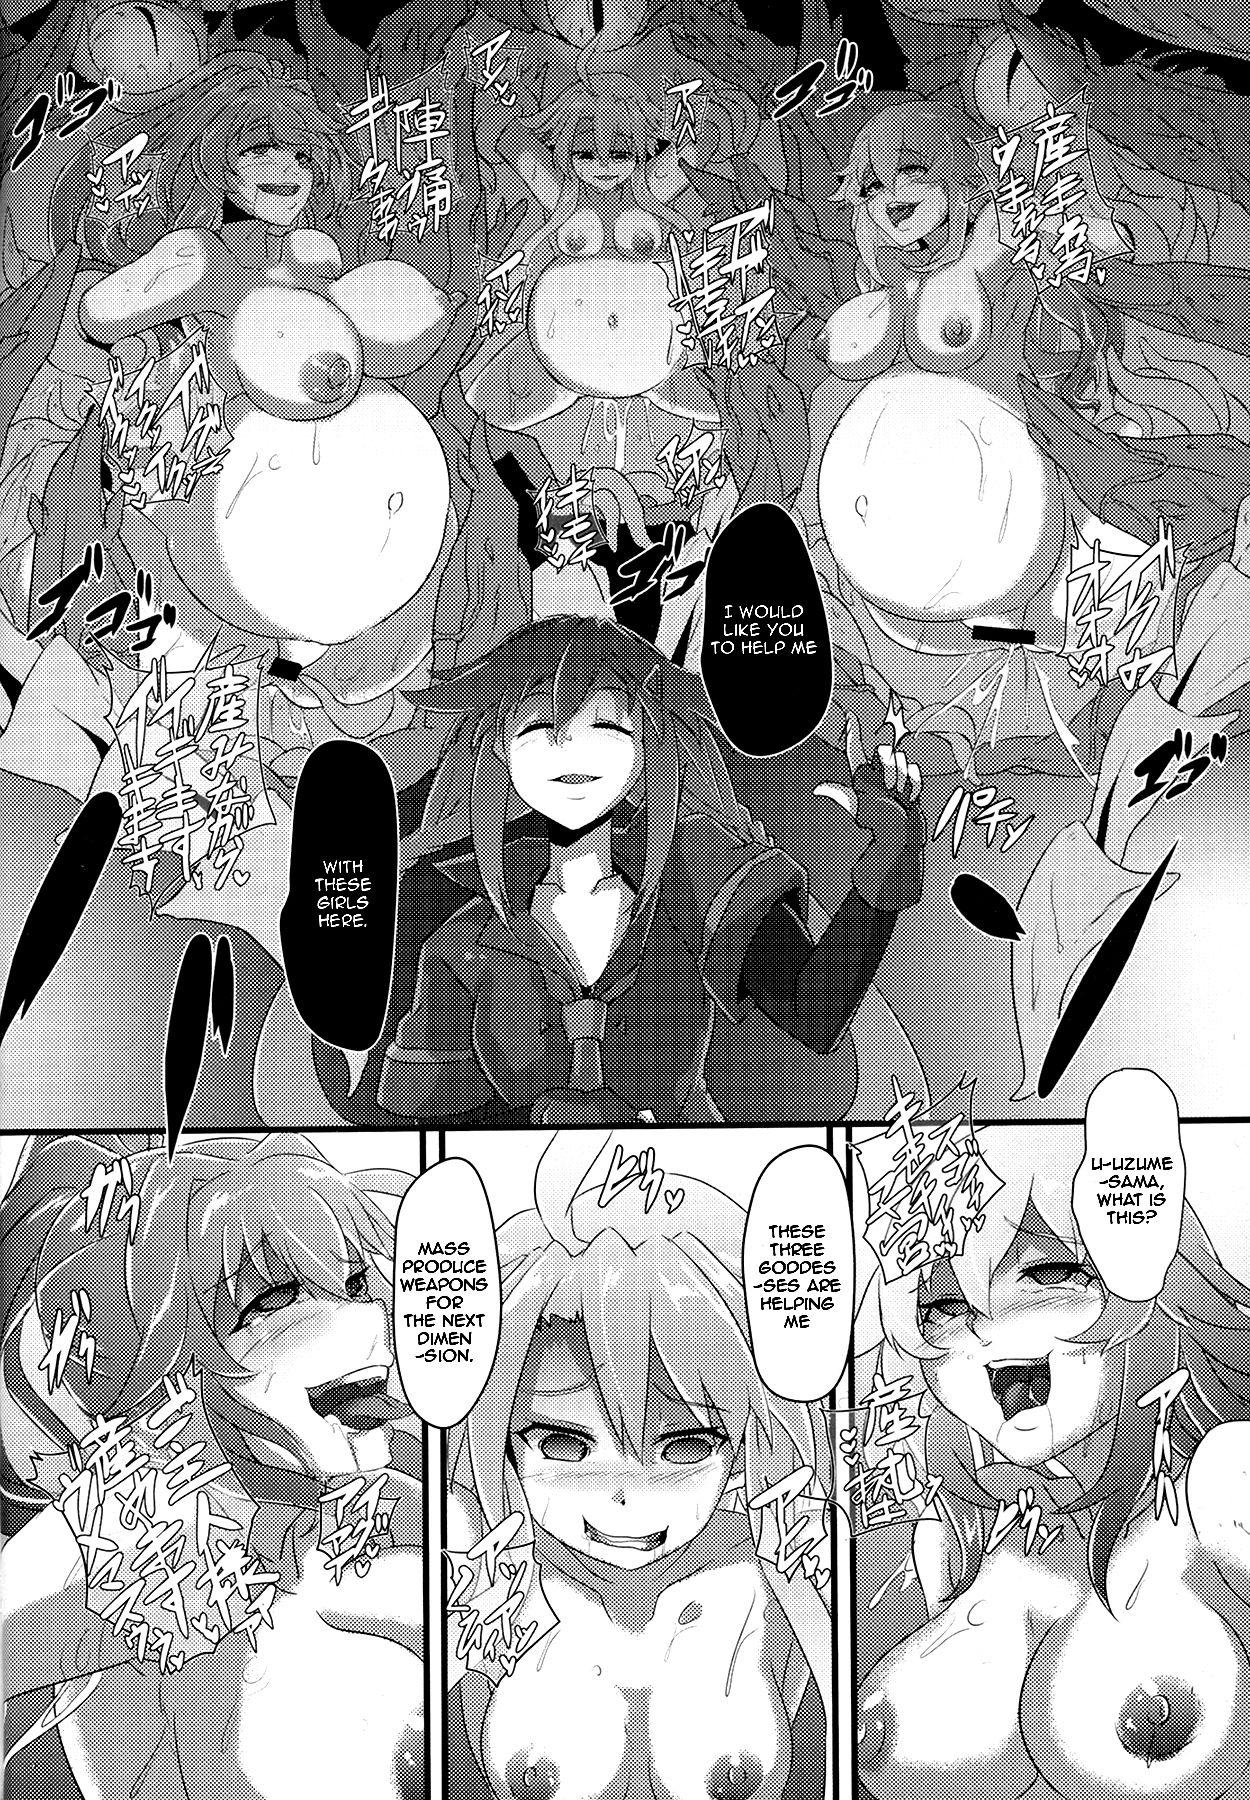 Animated After the Nightmare - Hyperdimension neptunia Slim - Page 6